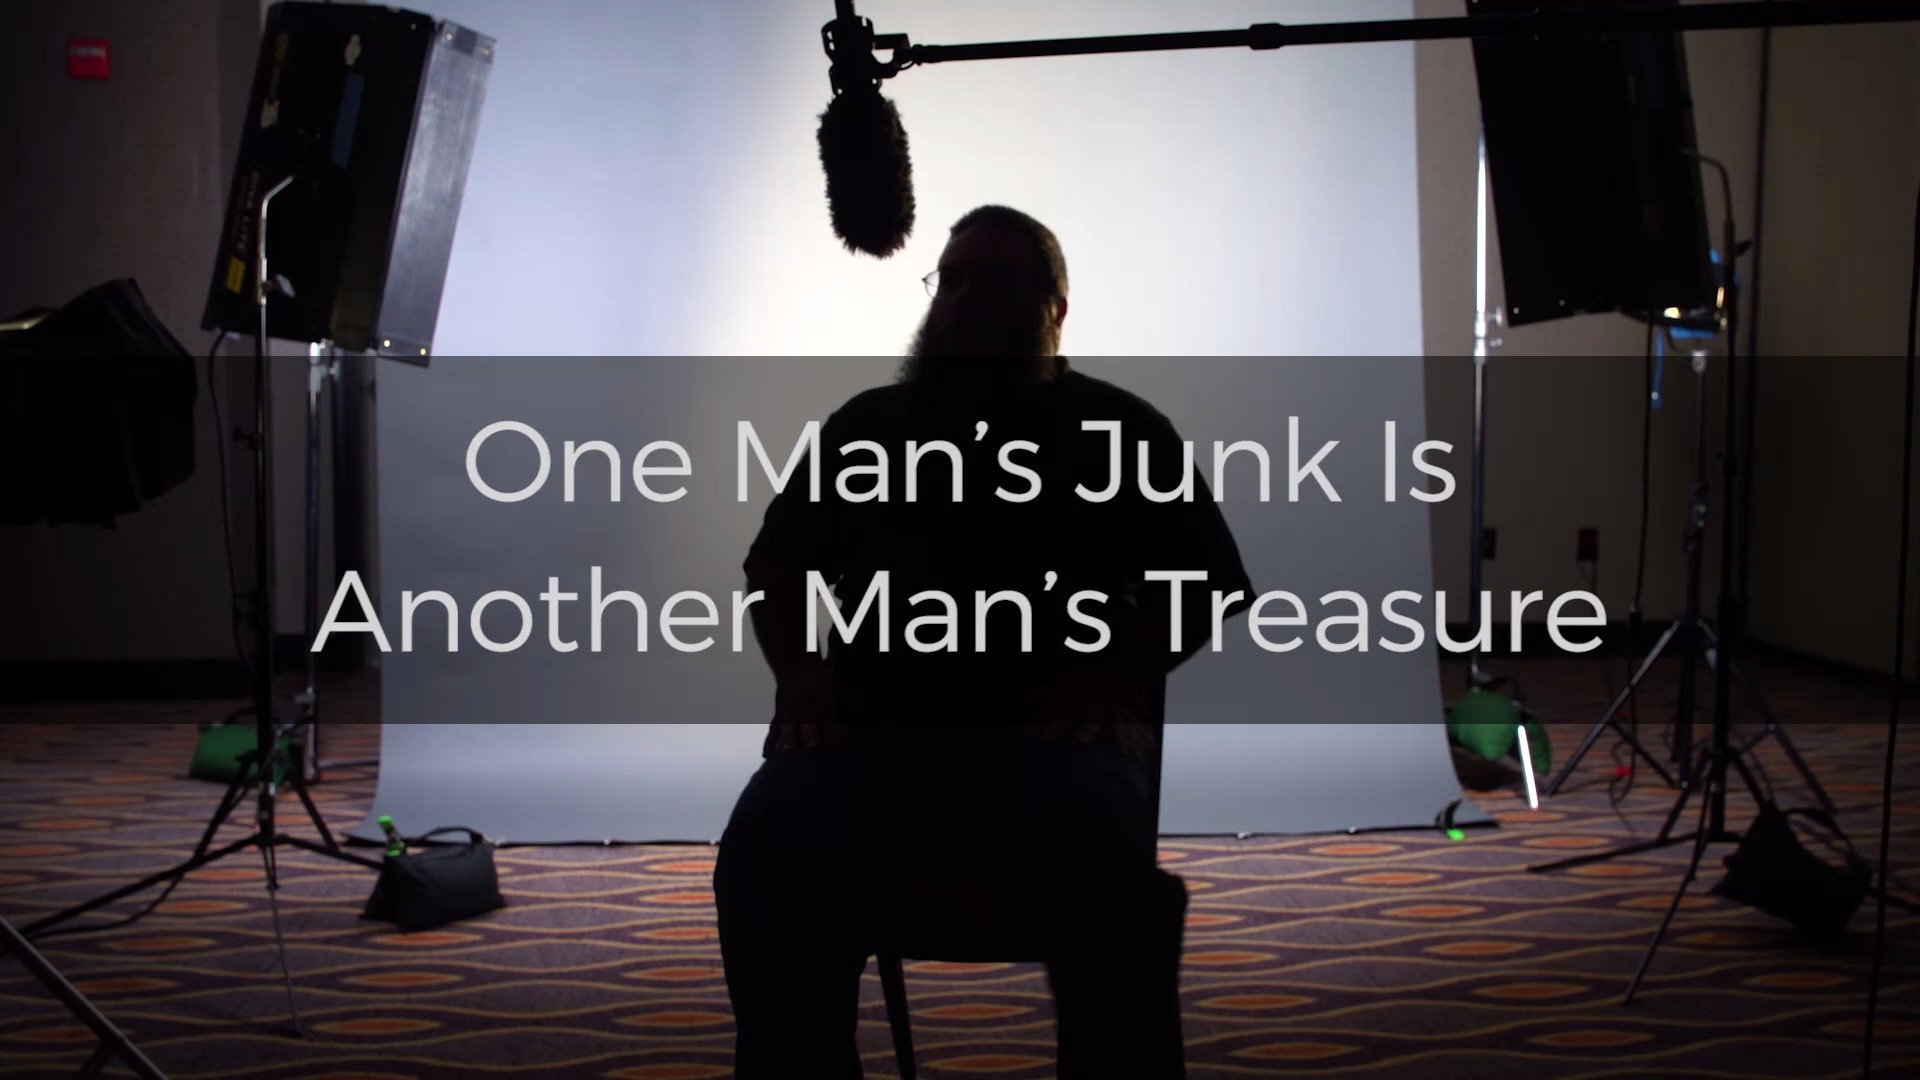 One Man’s Junk Is Another Man’s Treasure